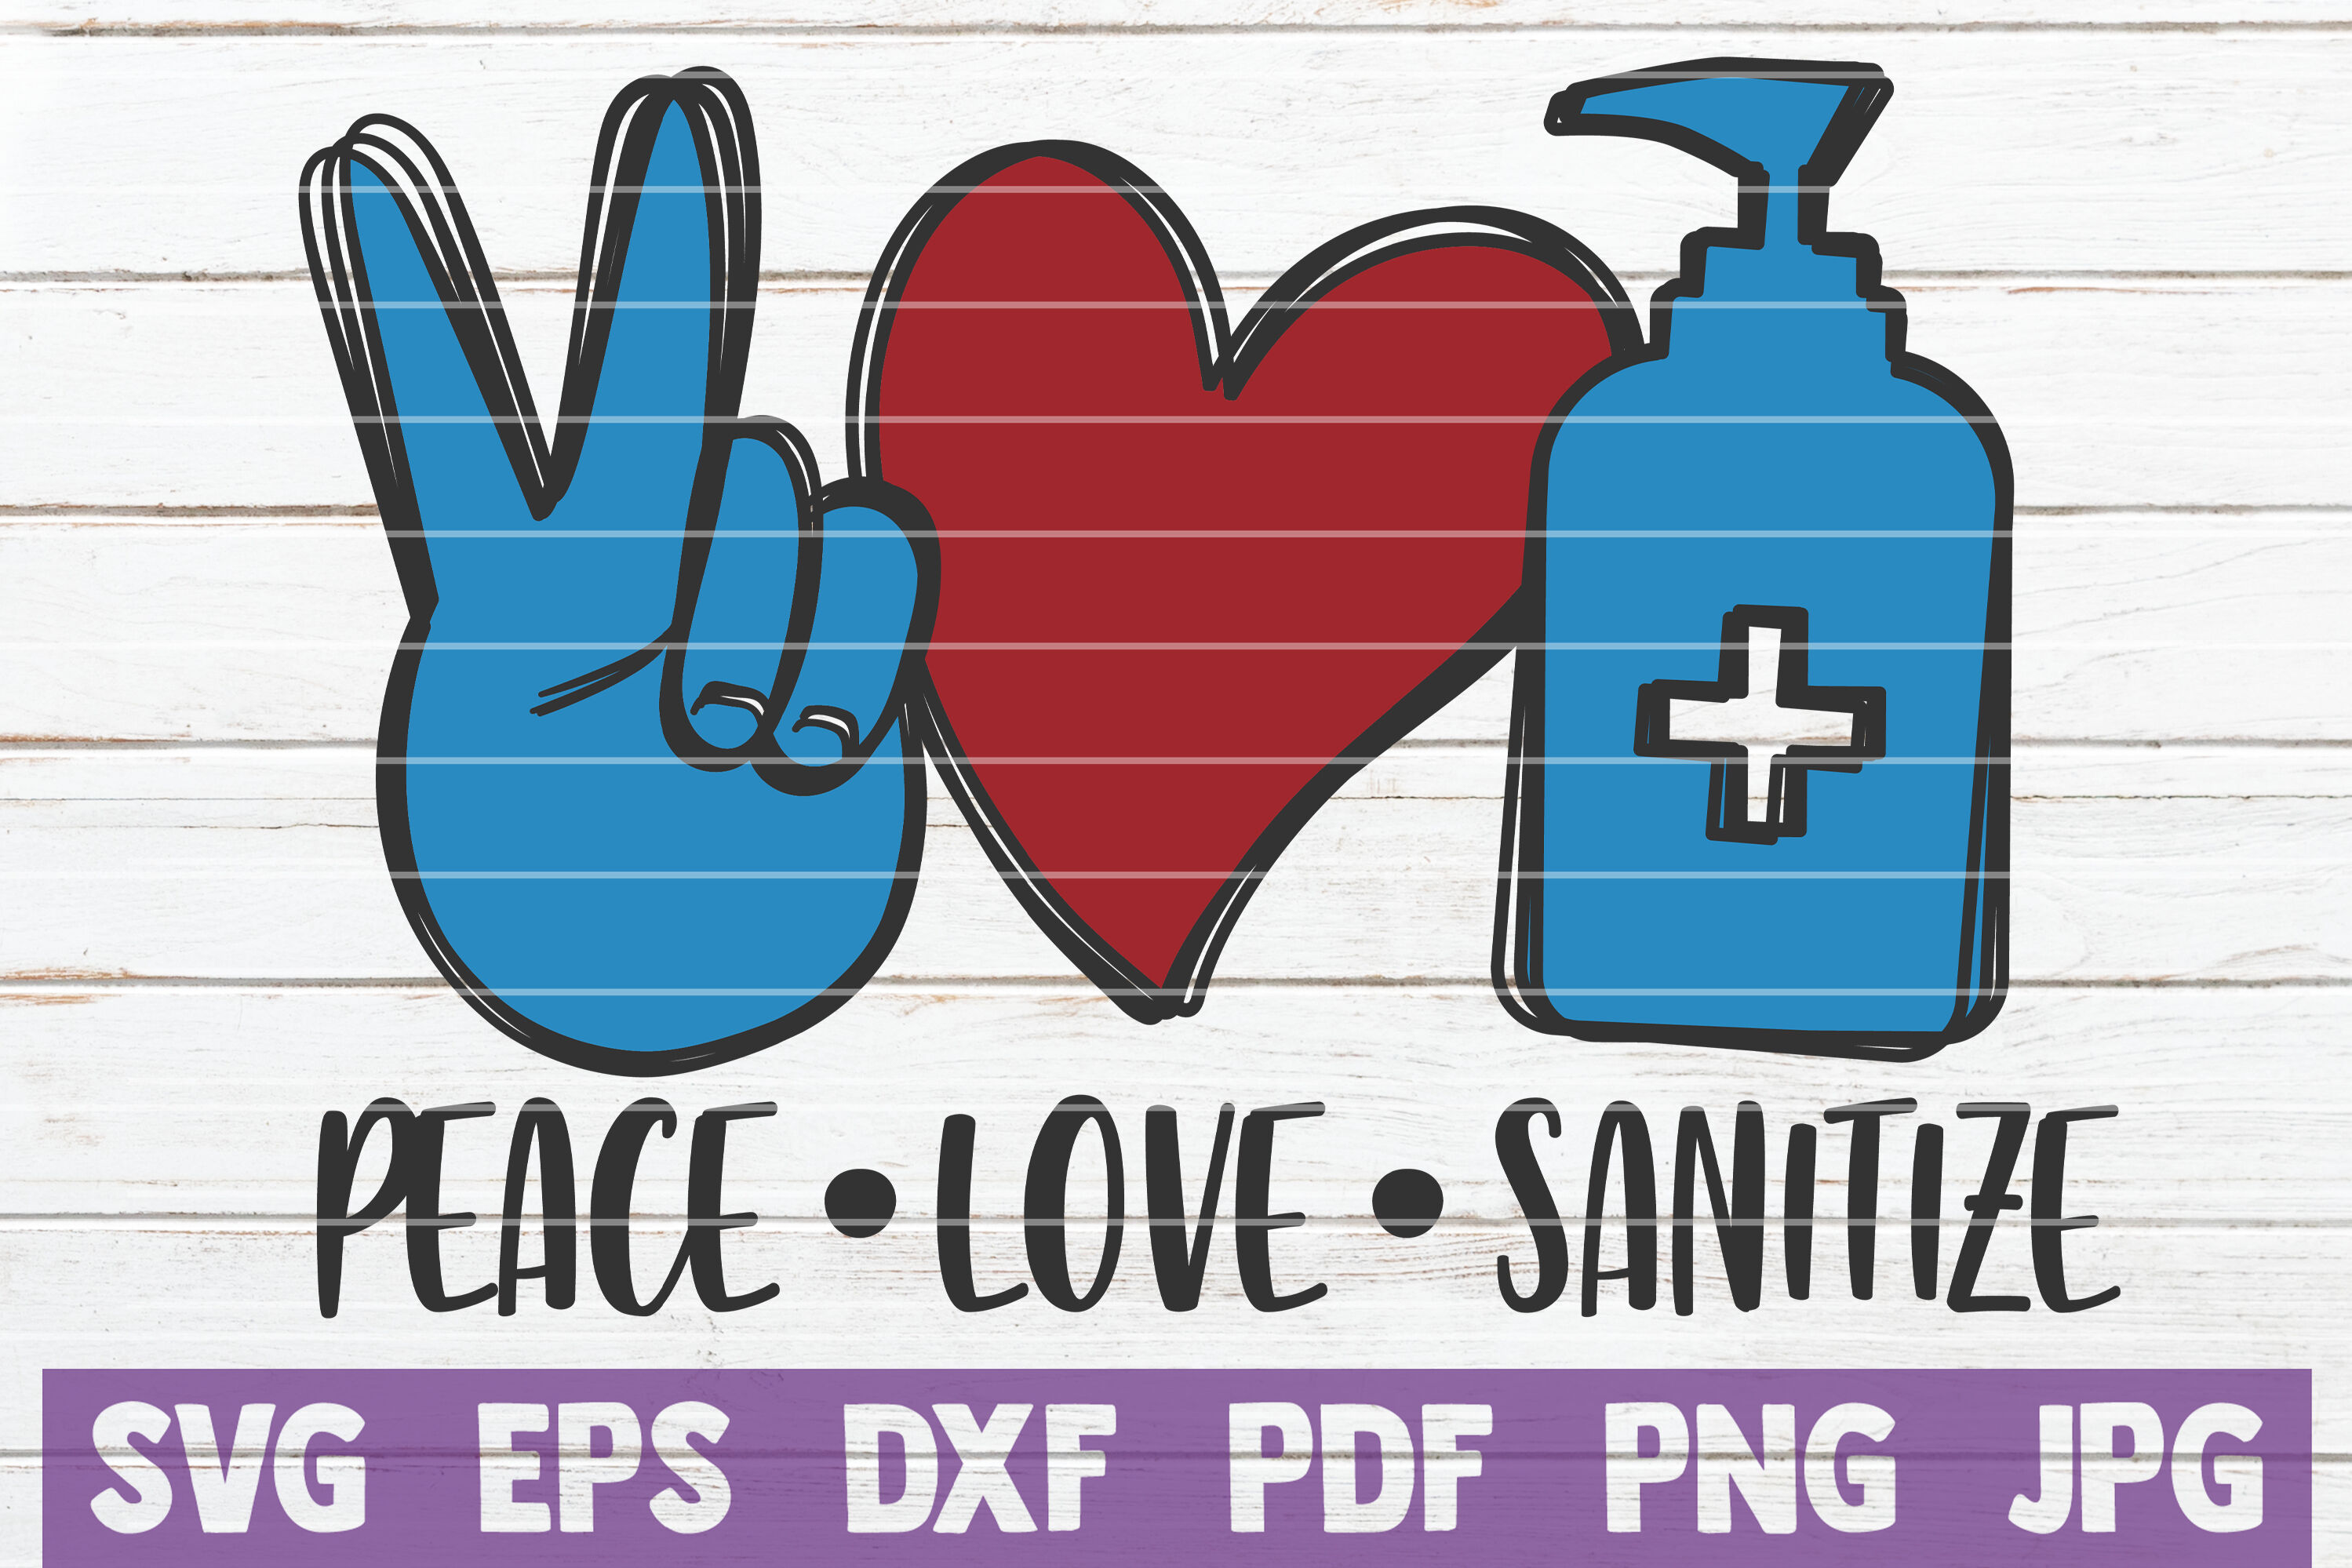 Download Peace Love Sanitize Svg Cut File By Mintymarshmallows Thehungryjpeg Com